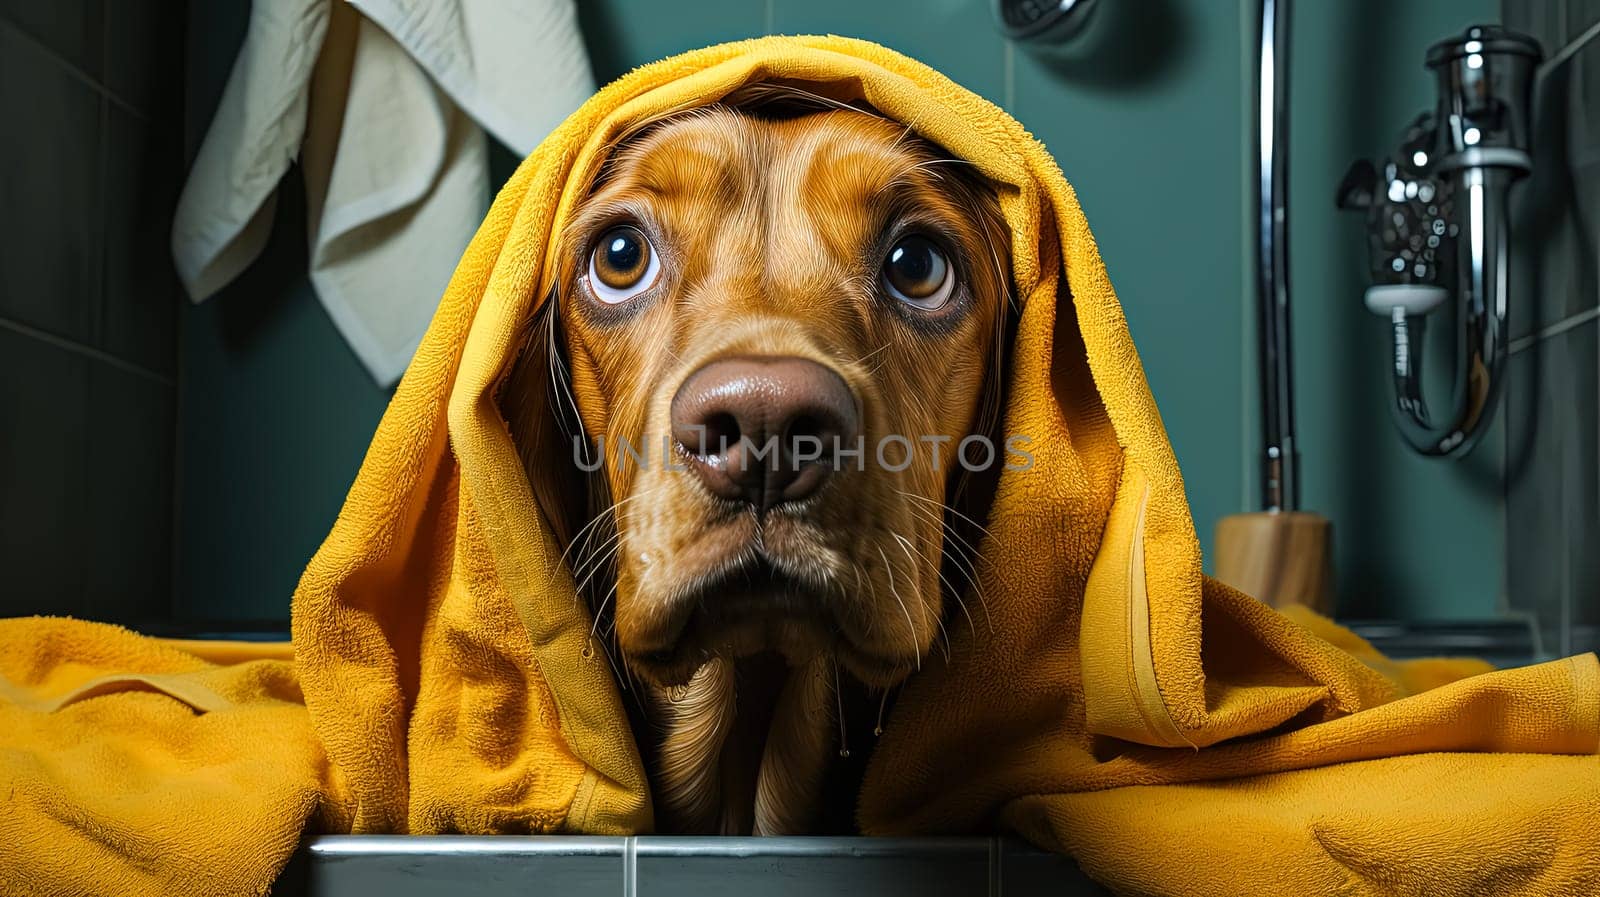 A Hungarian Vizsla, snug in a yellow towel post bath, epitomizing pet care and grooming services, ensuring a clean and happy companion.